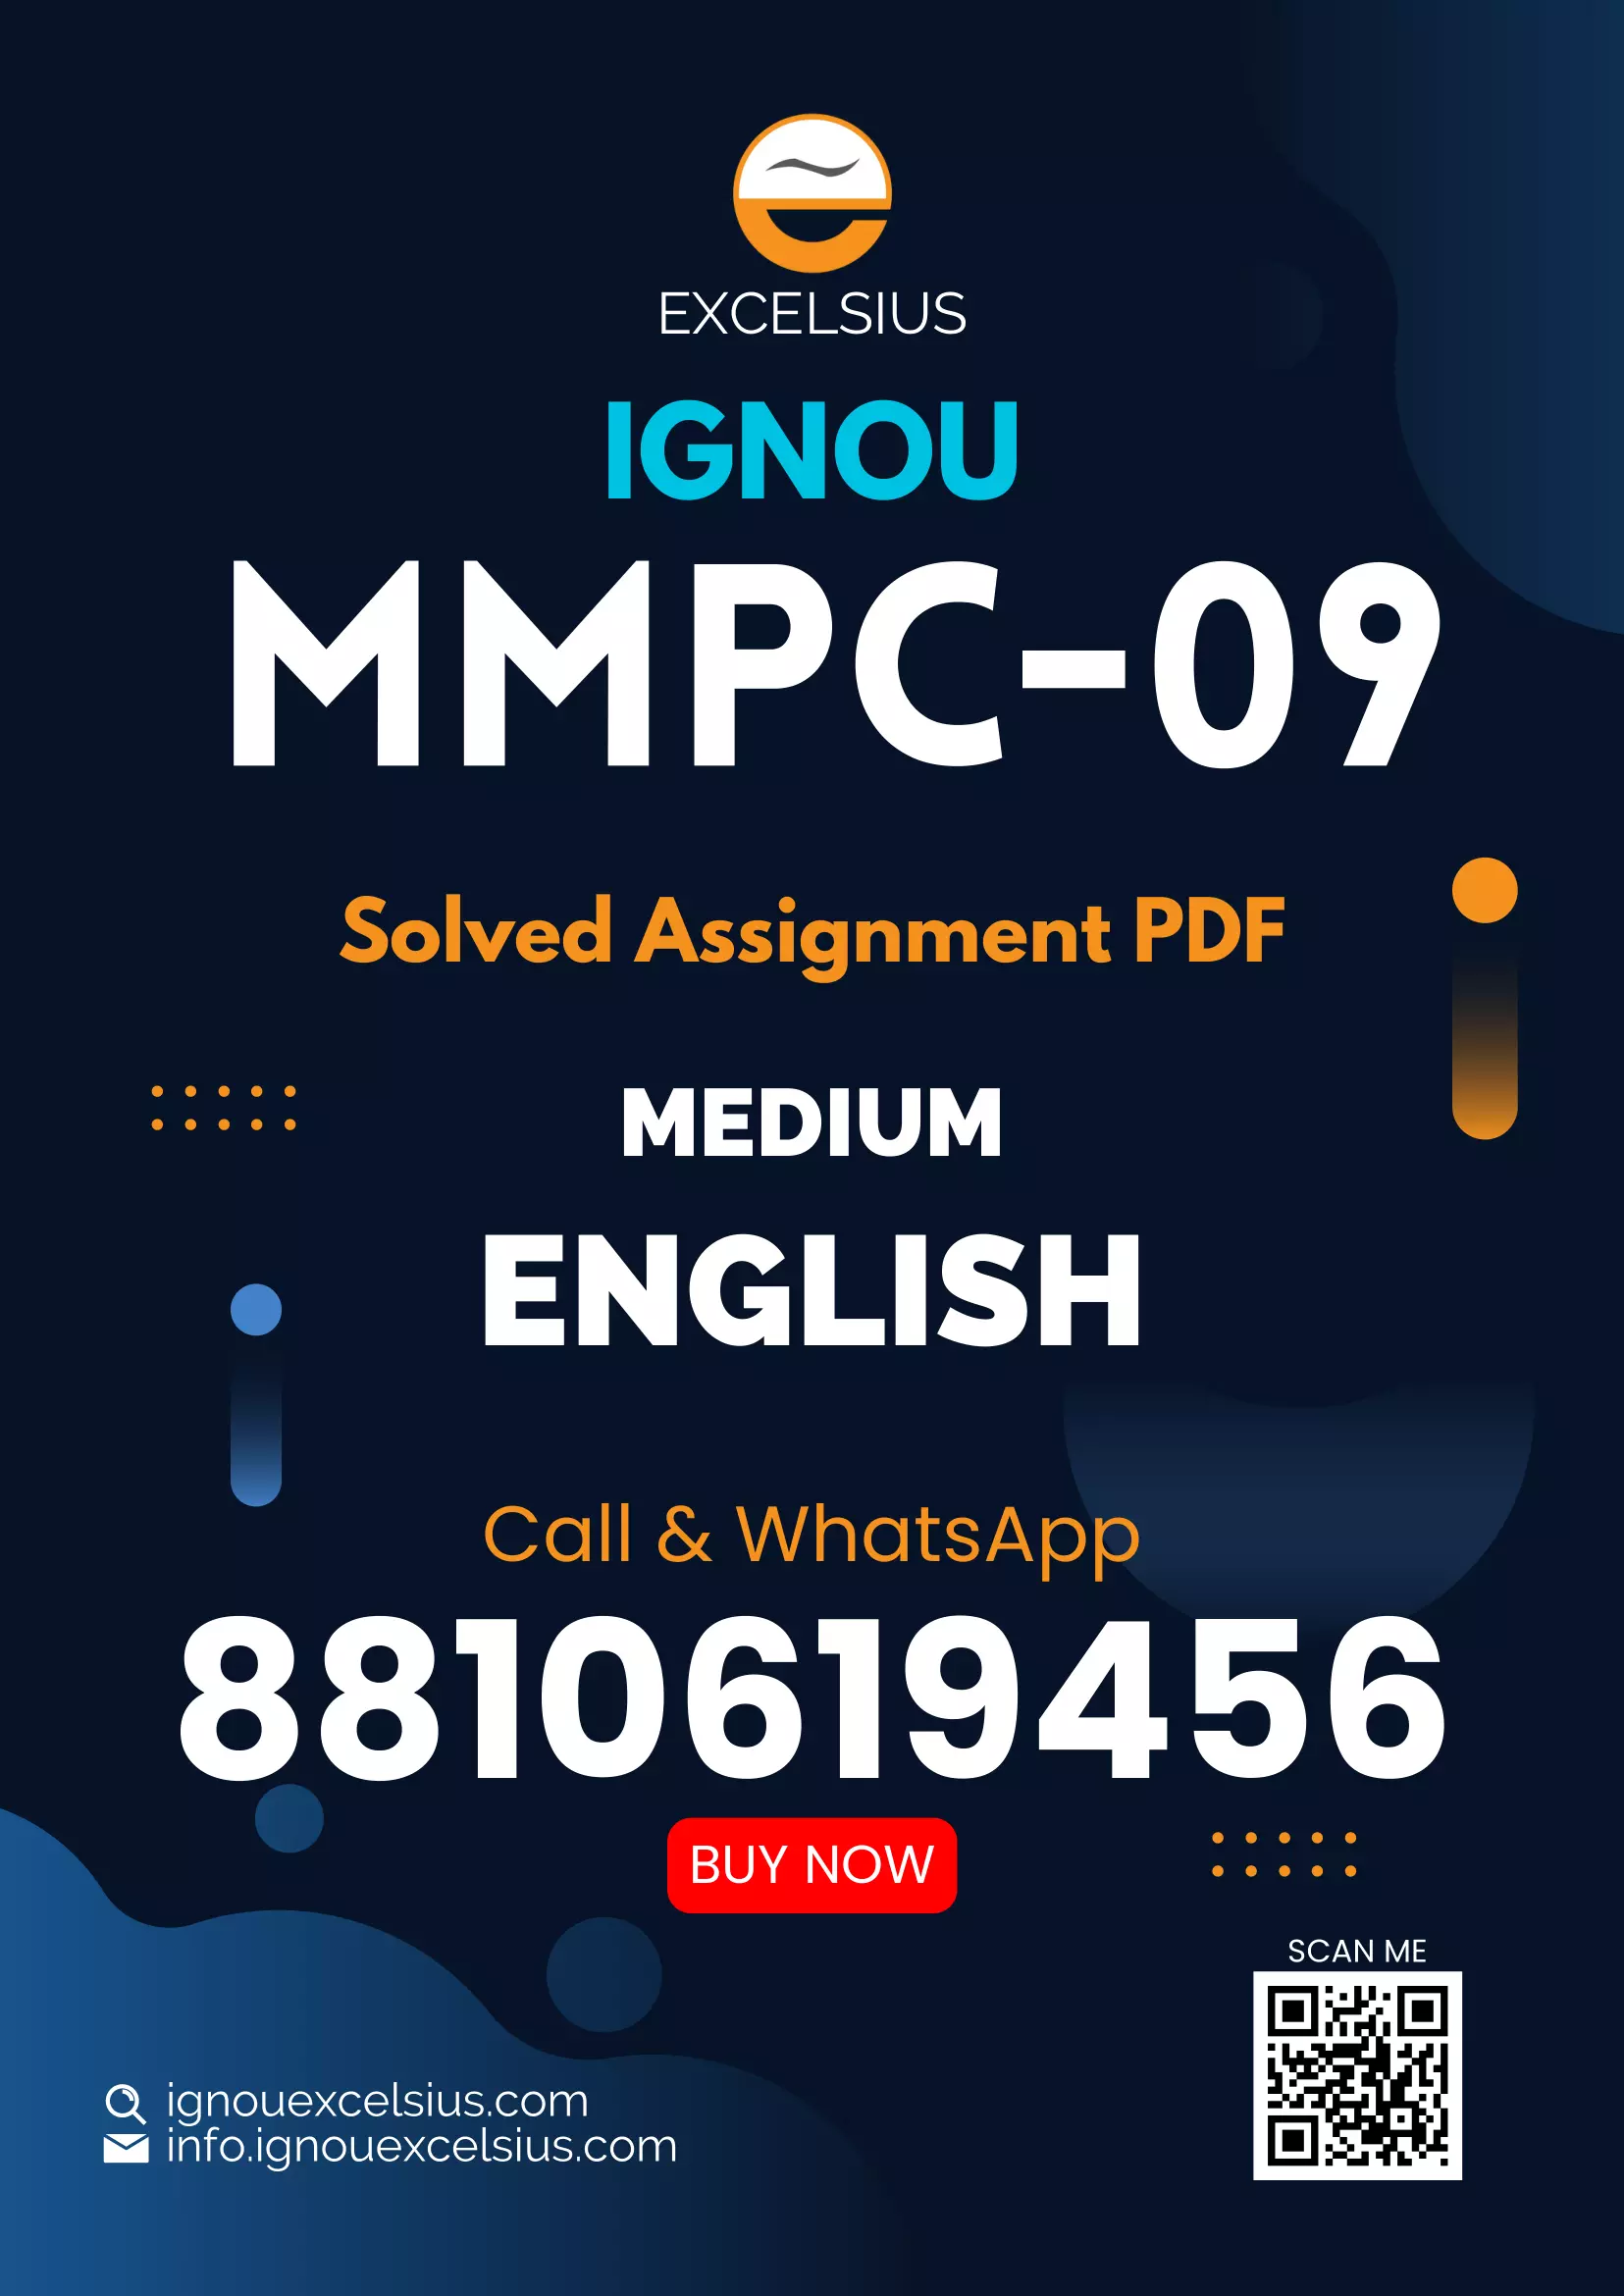 IGNOU MMPC-09 - Management of Machines and Materials Latest Solved Assignment-January 2024 - July 2024